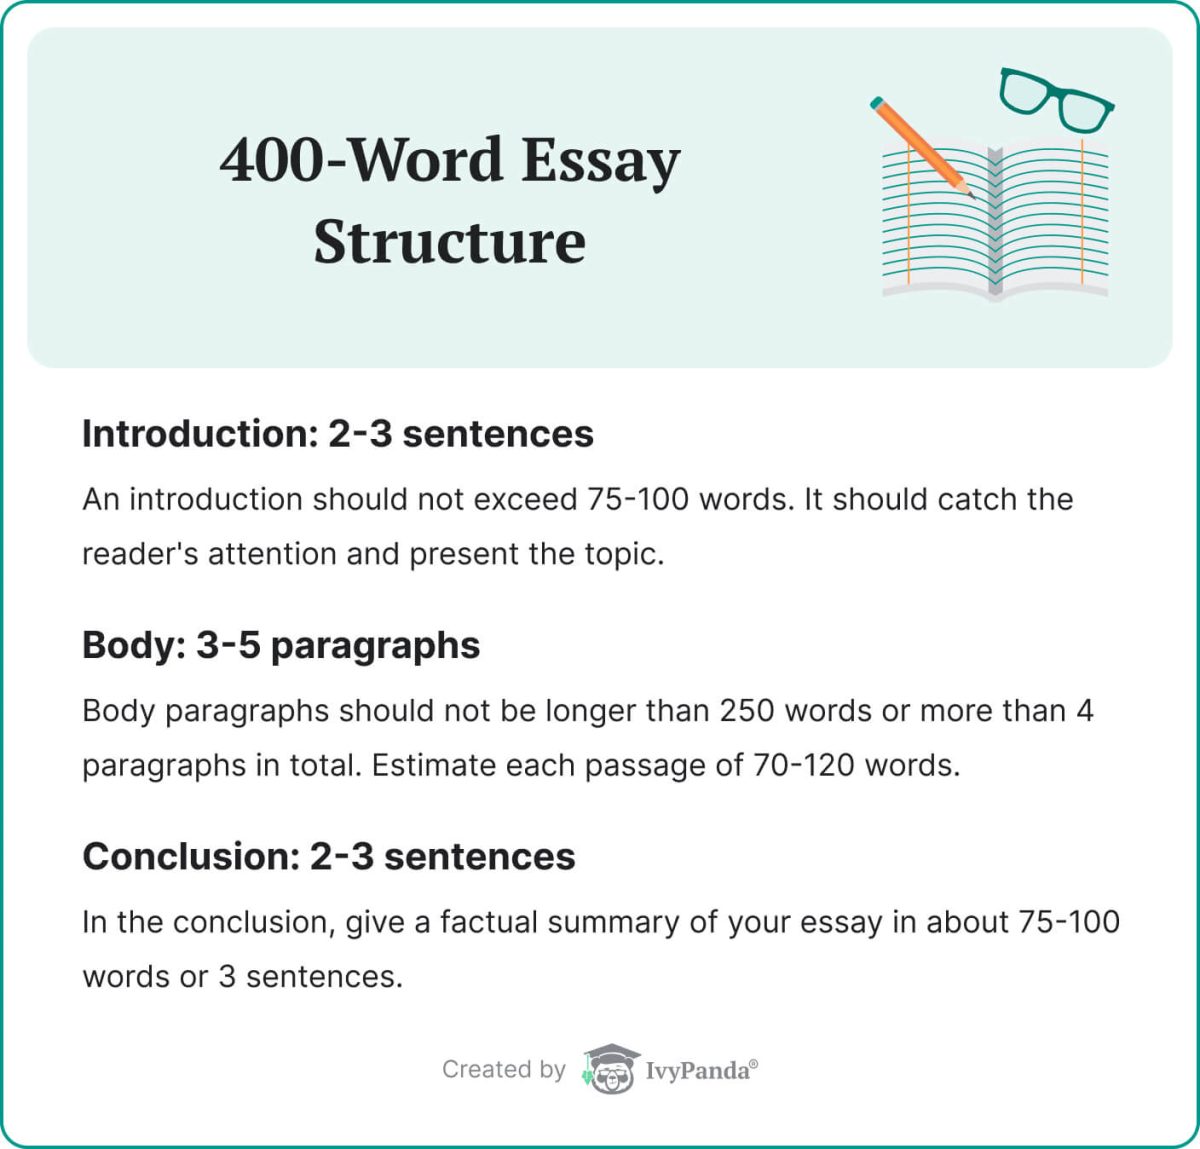 The picture describes a 400-word essay structure.